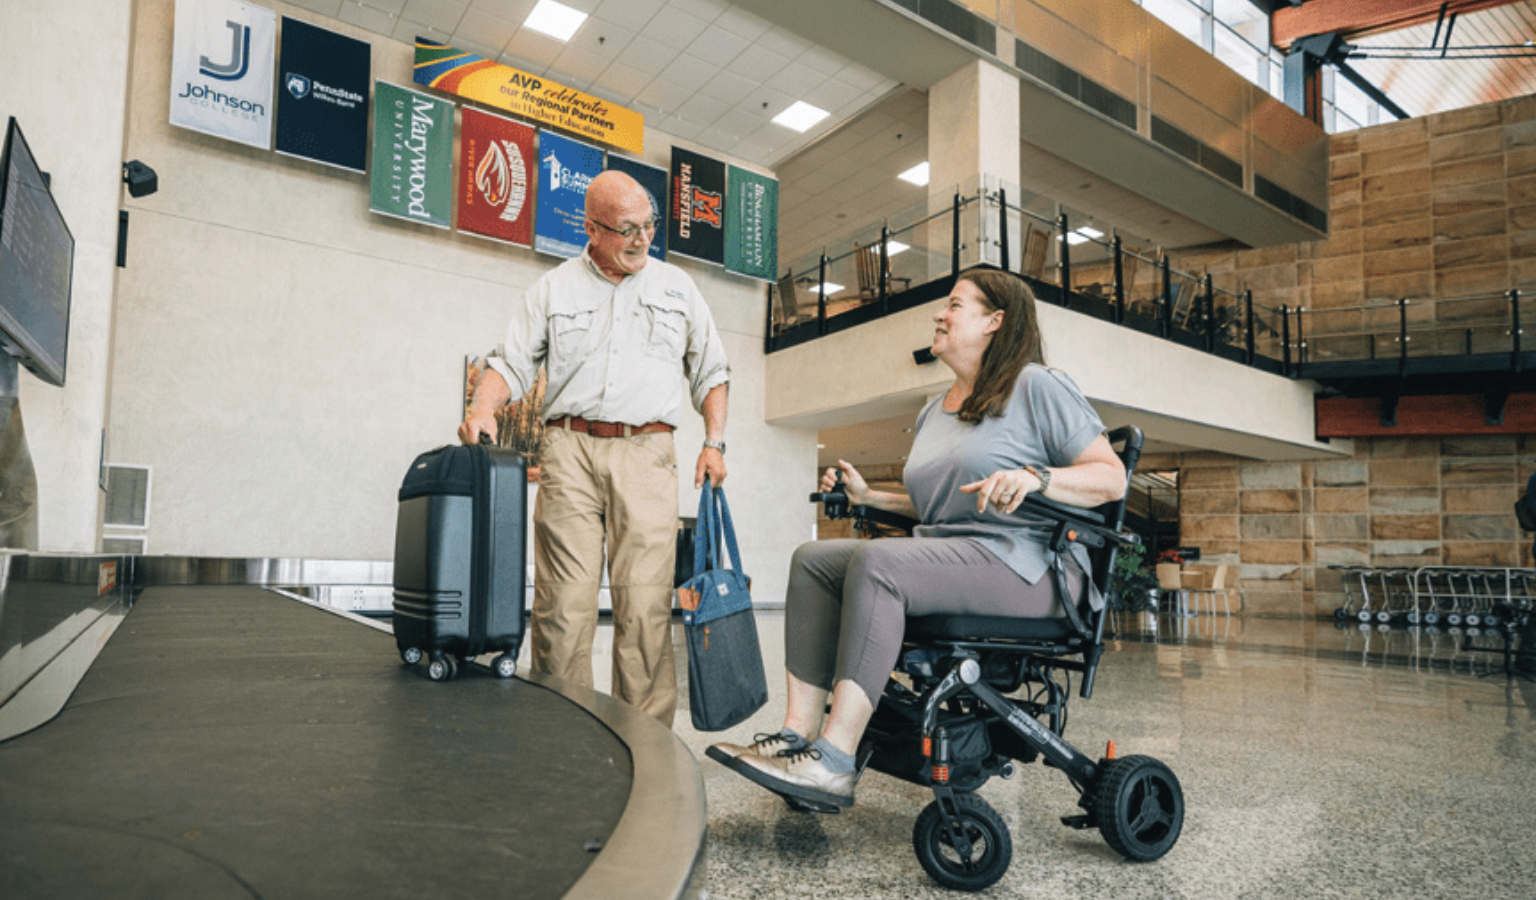 Flying with a lithium-powered mobility device.